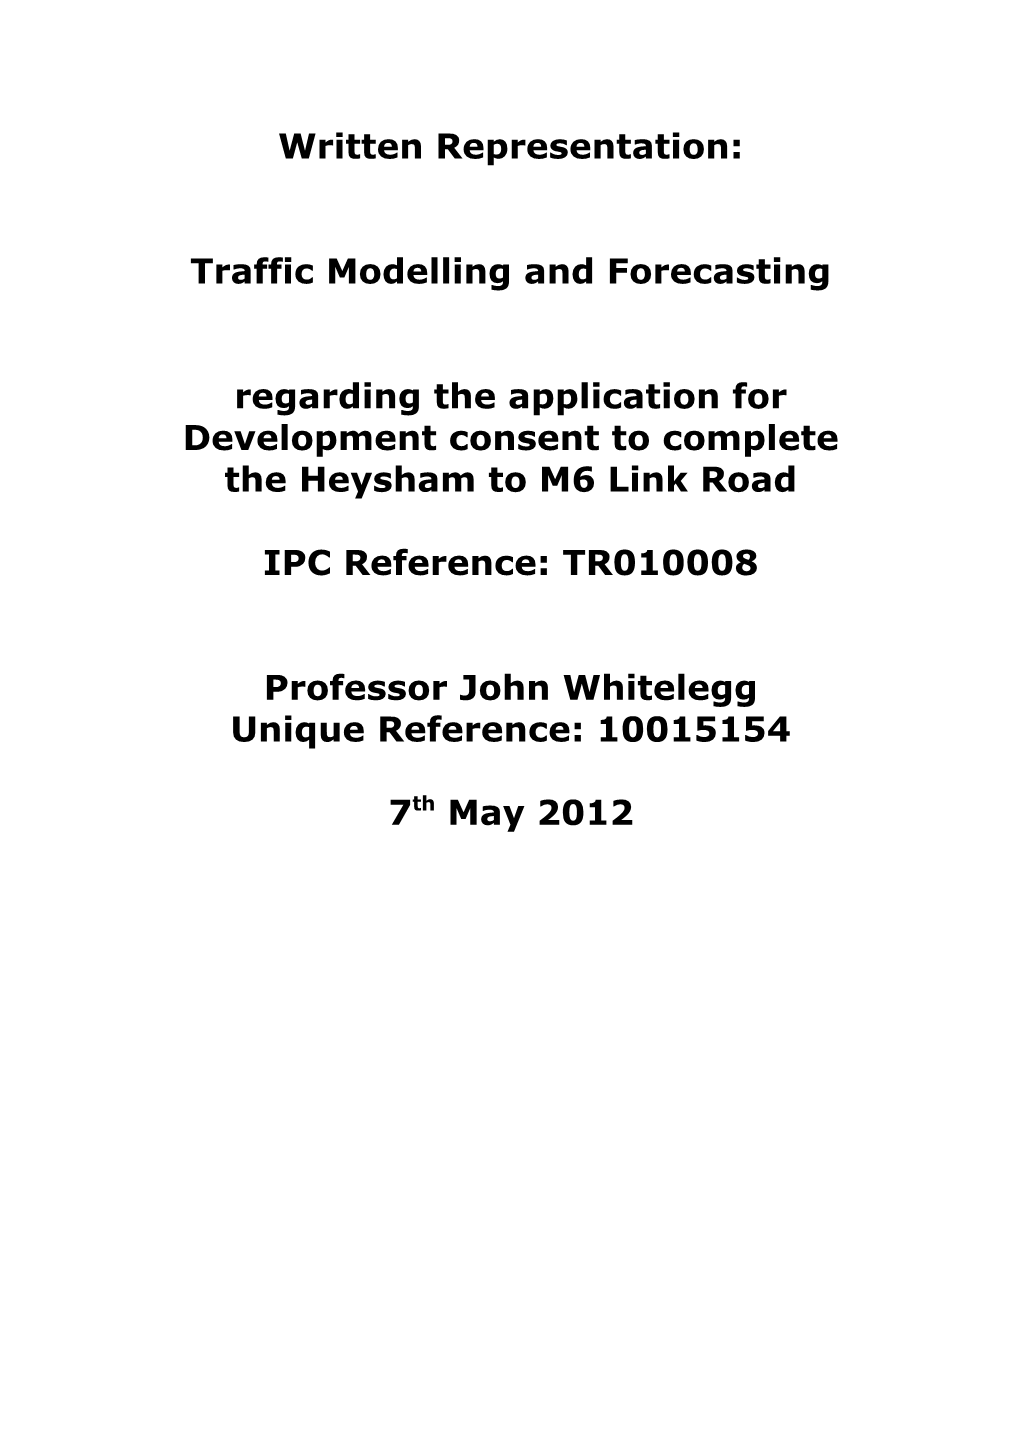 Traffic Modelling and Forecasting